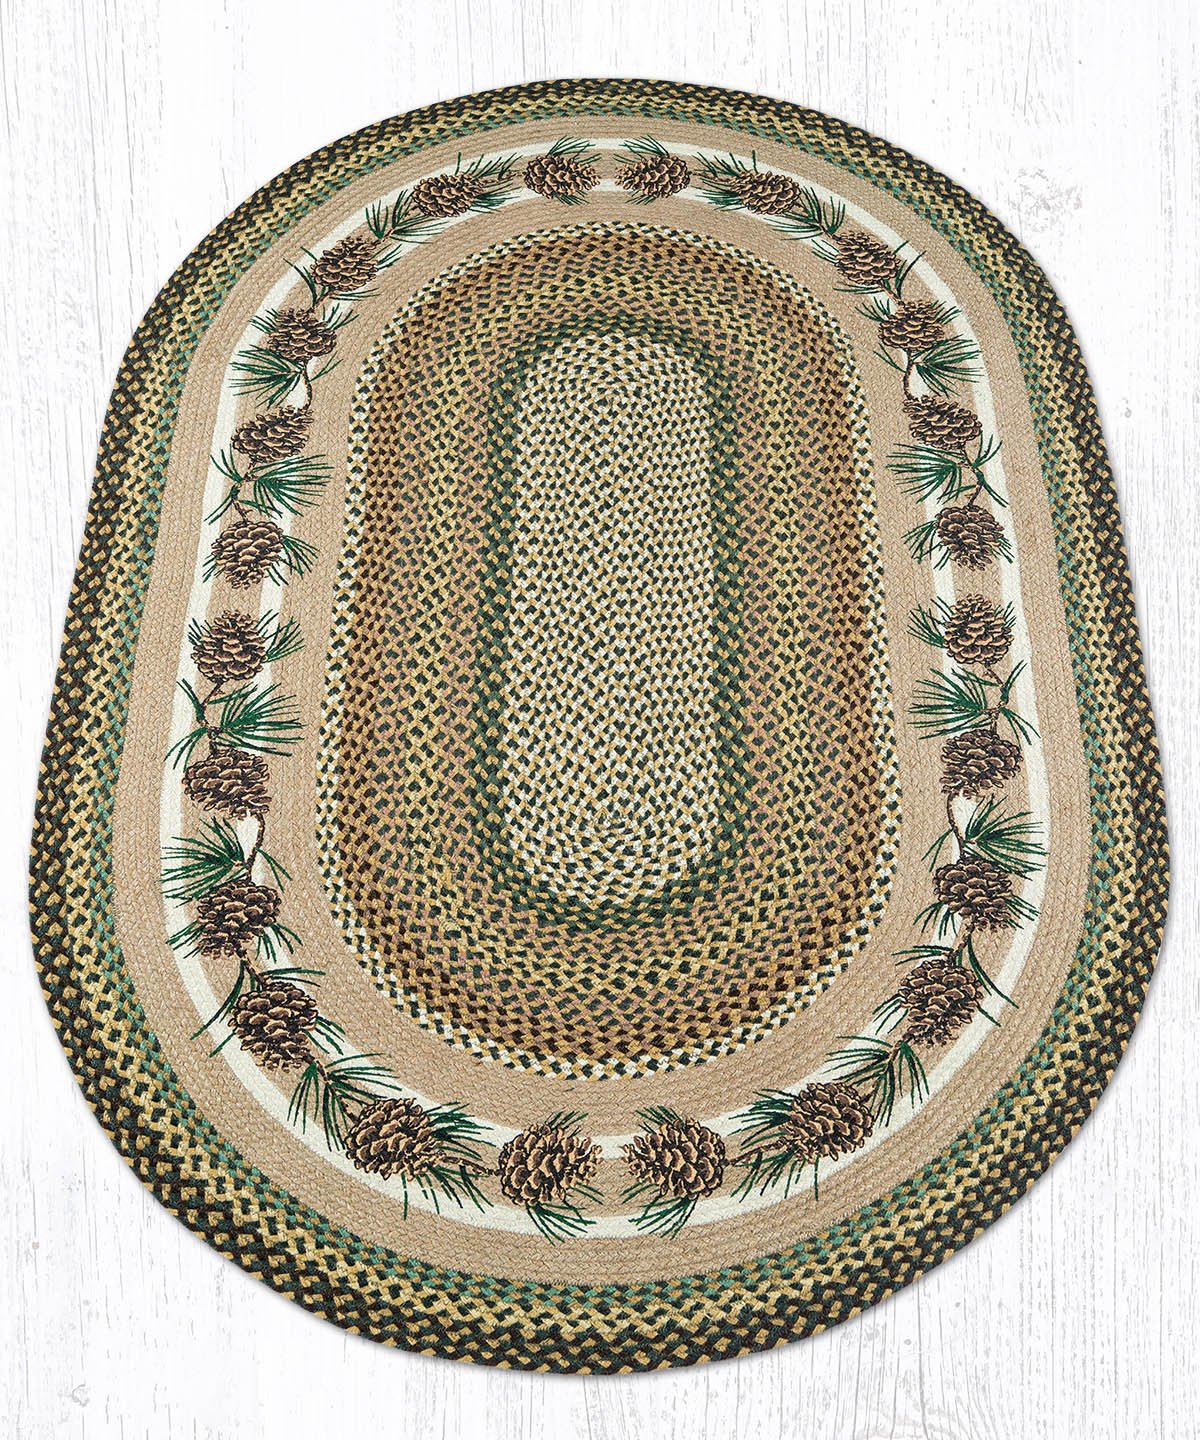 Needles & Cones Design Oval Braided Rug 5'x8'  - Earth Rugs